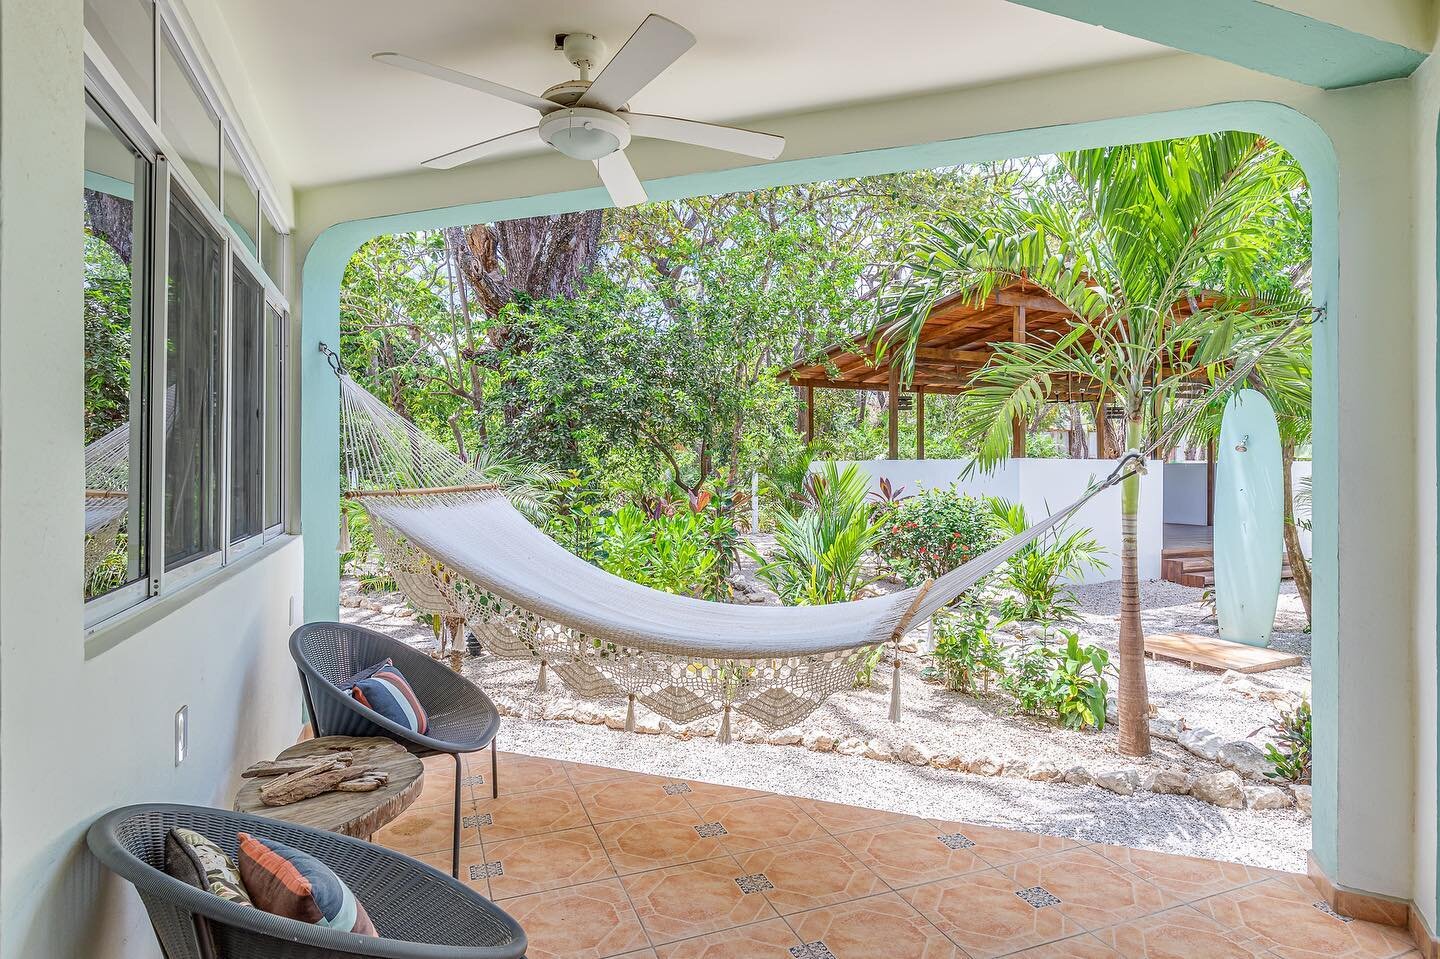 The hammock kind of life 🙌🌴🌊 
.
.
.
.
.
.
#whitepicketfence #guiones #nosara #costarica #vacationrental #holiday #relax #luxury #nature #beach #guionesbeach